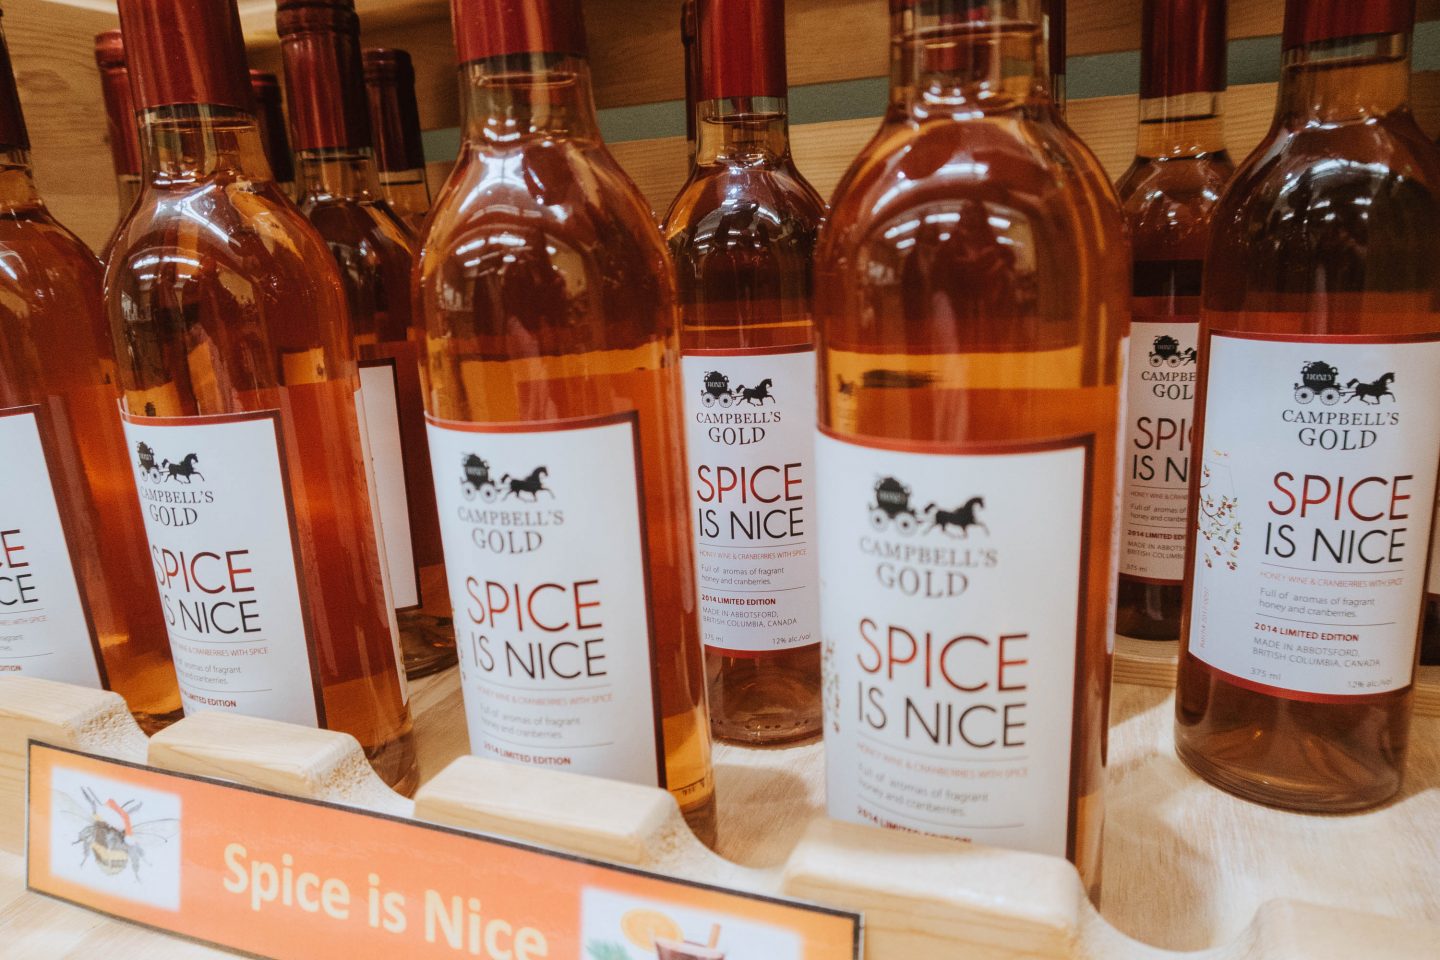 Spice is Nice honey wine at Campbell’s Gold and Honey Meadery